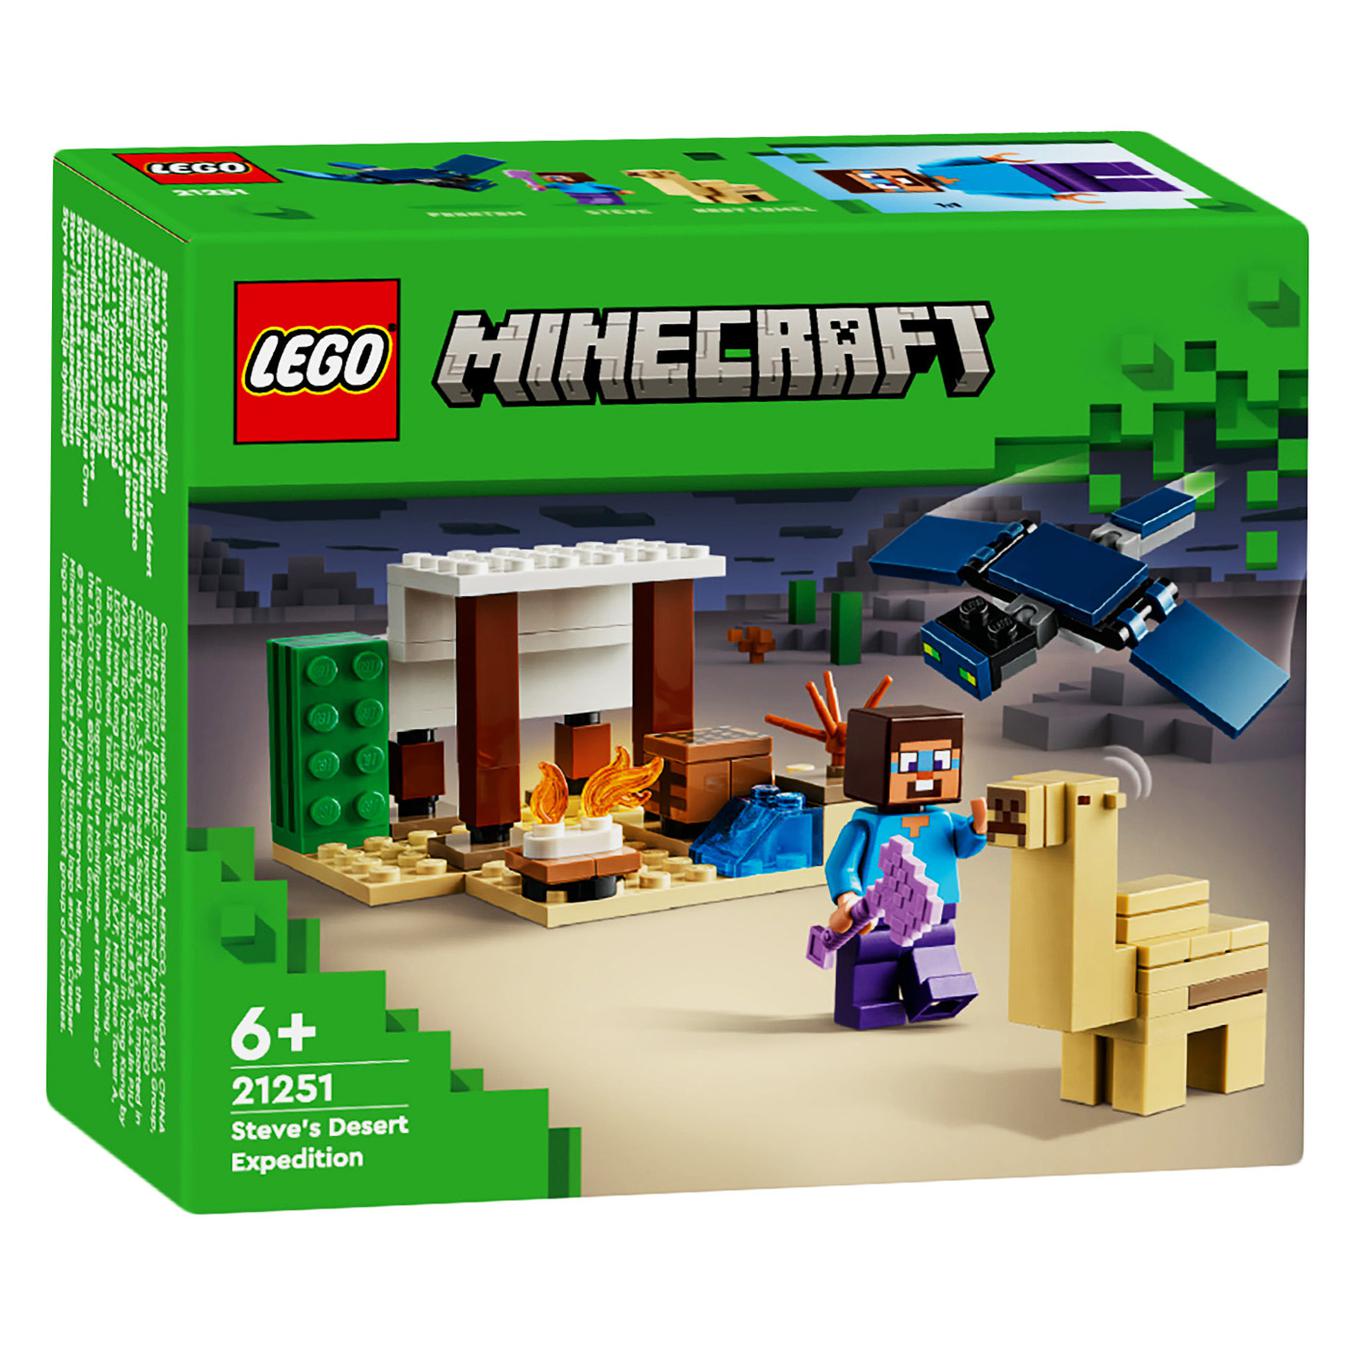 Constructor LEGO Minecraft 21251 Steve's expedition to the desert